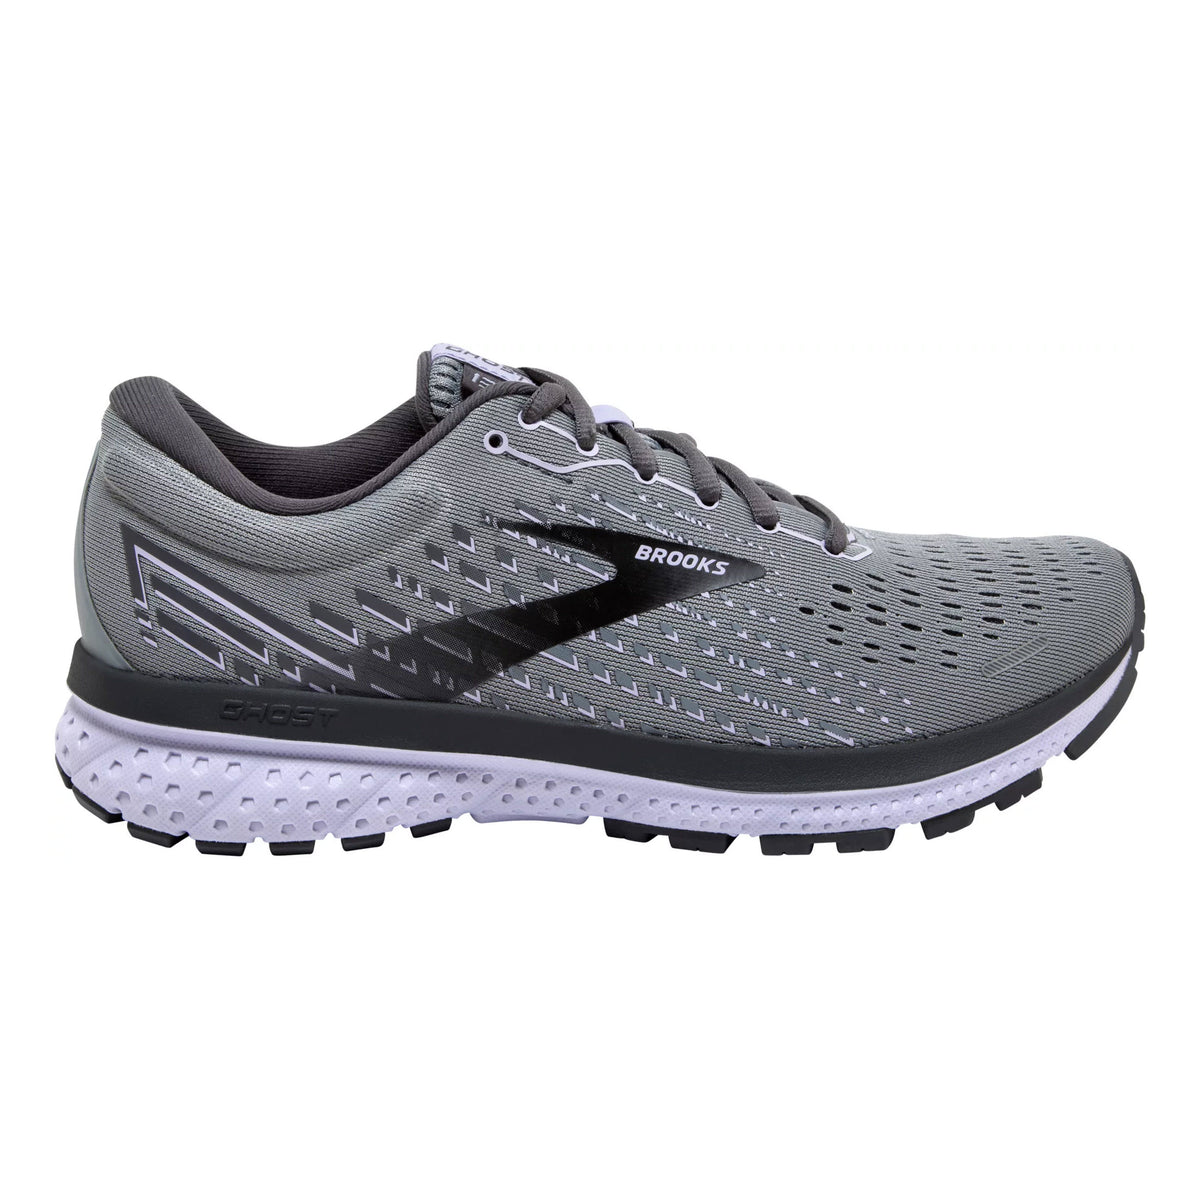 Men&#39;s Brooks Ghost 13 running shoe in gray color with DNA LOFT cushioning.